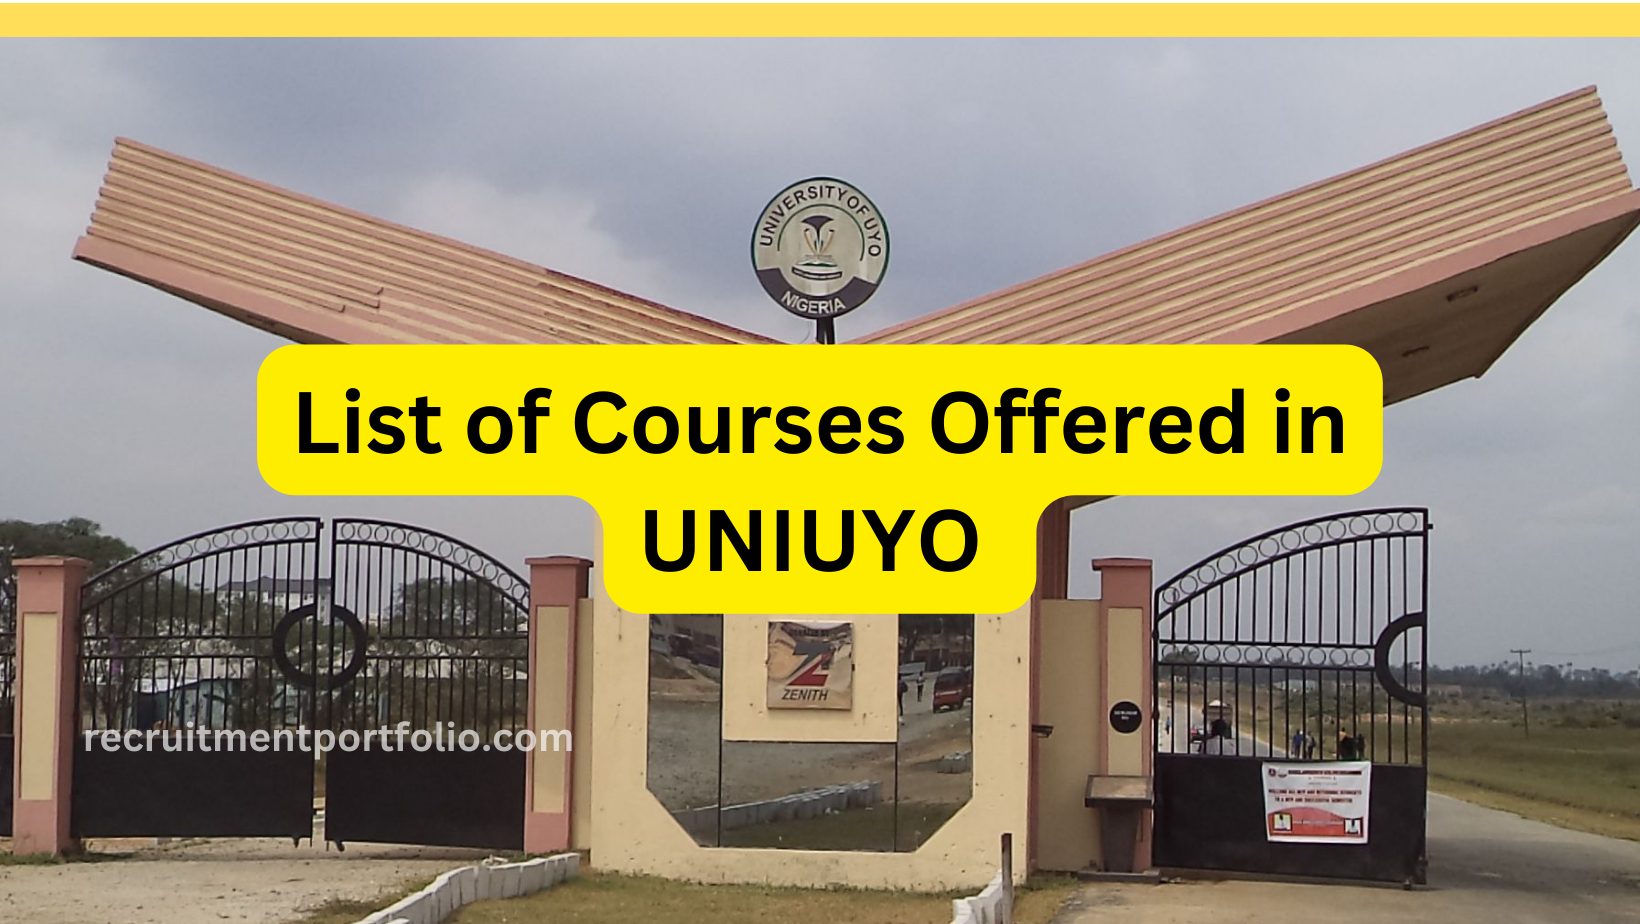 List of Courses Offered in UNIUYO